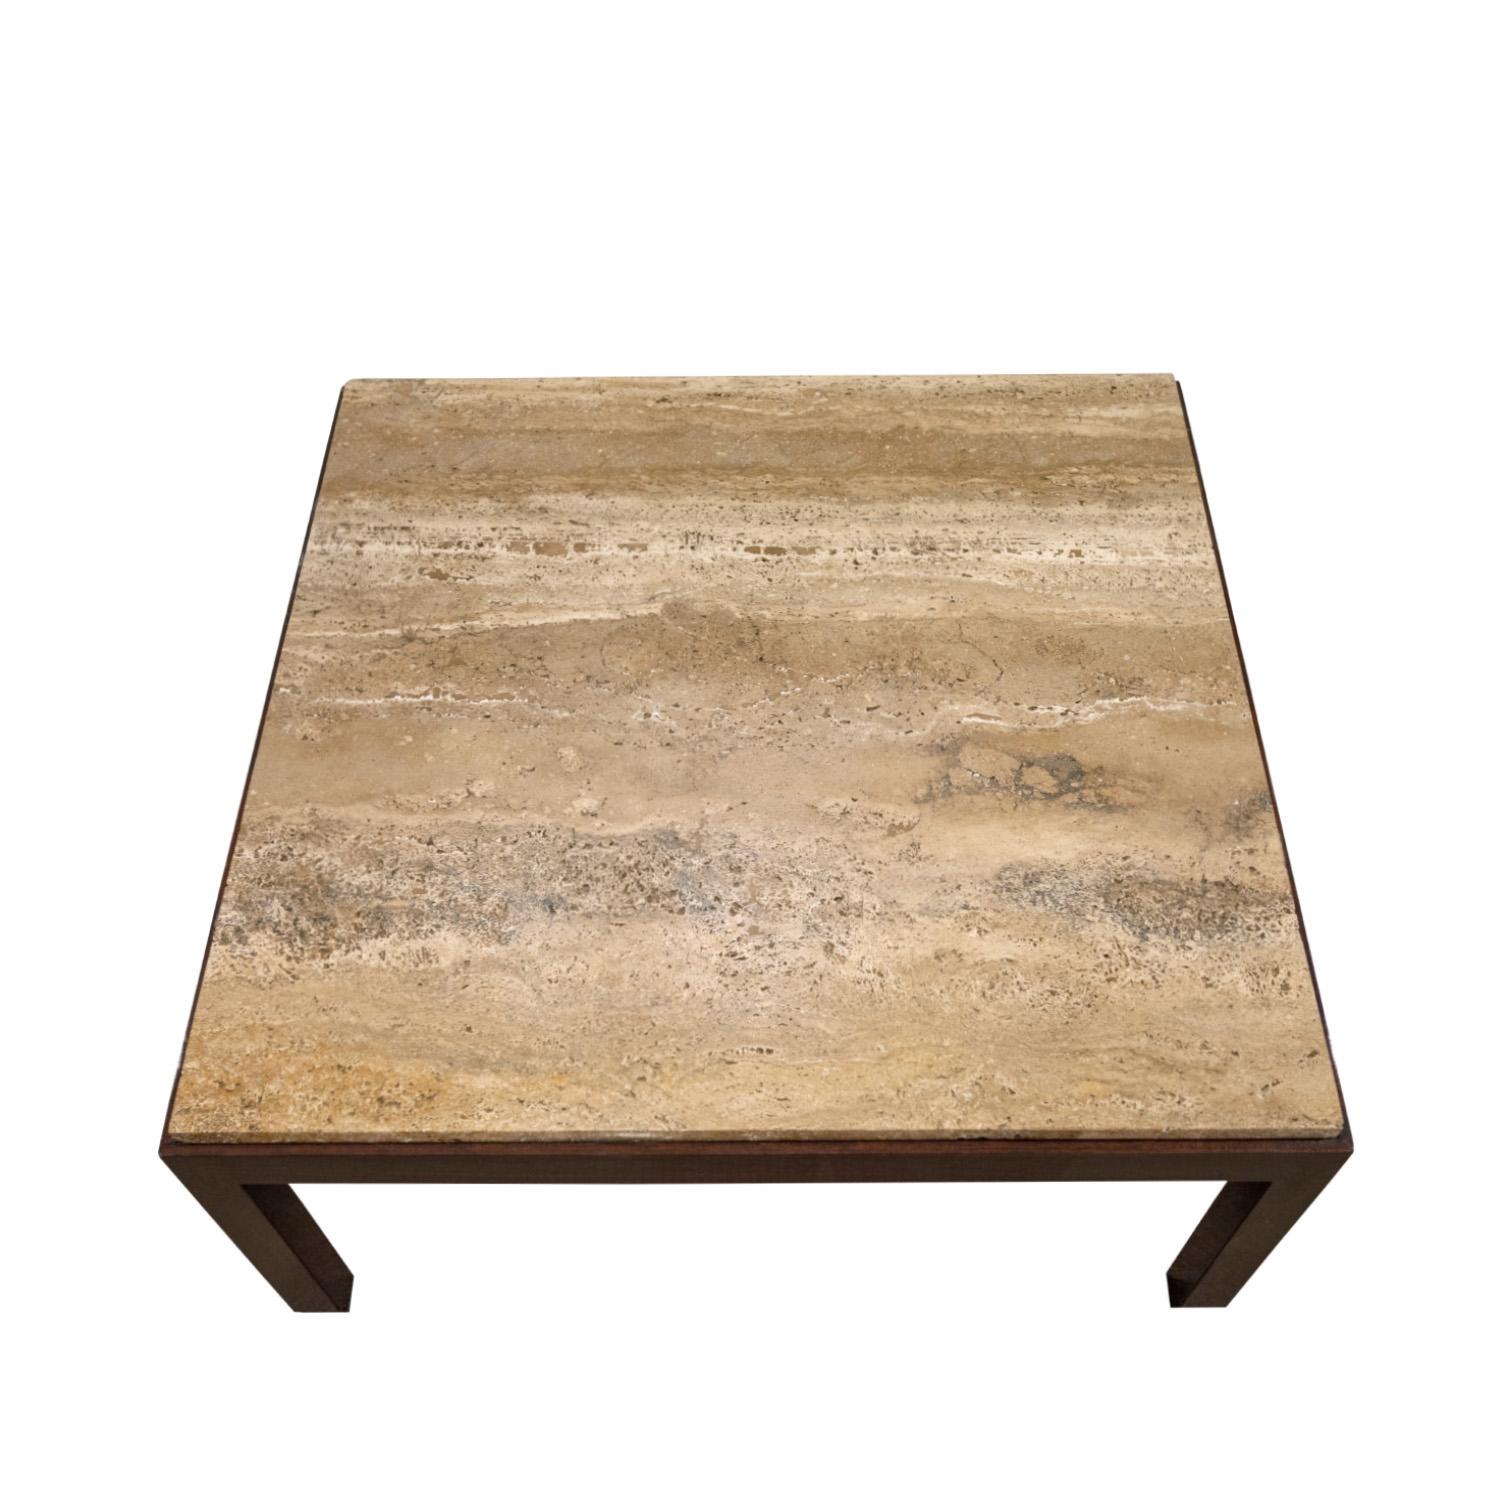 American Edward Wormley Coffee Table with Italian Travertine Top 1952 'Signed' For Sale